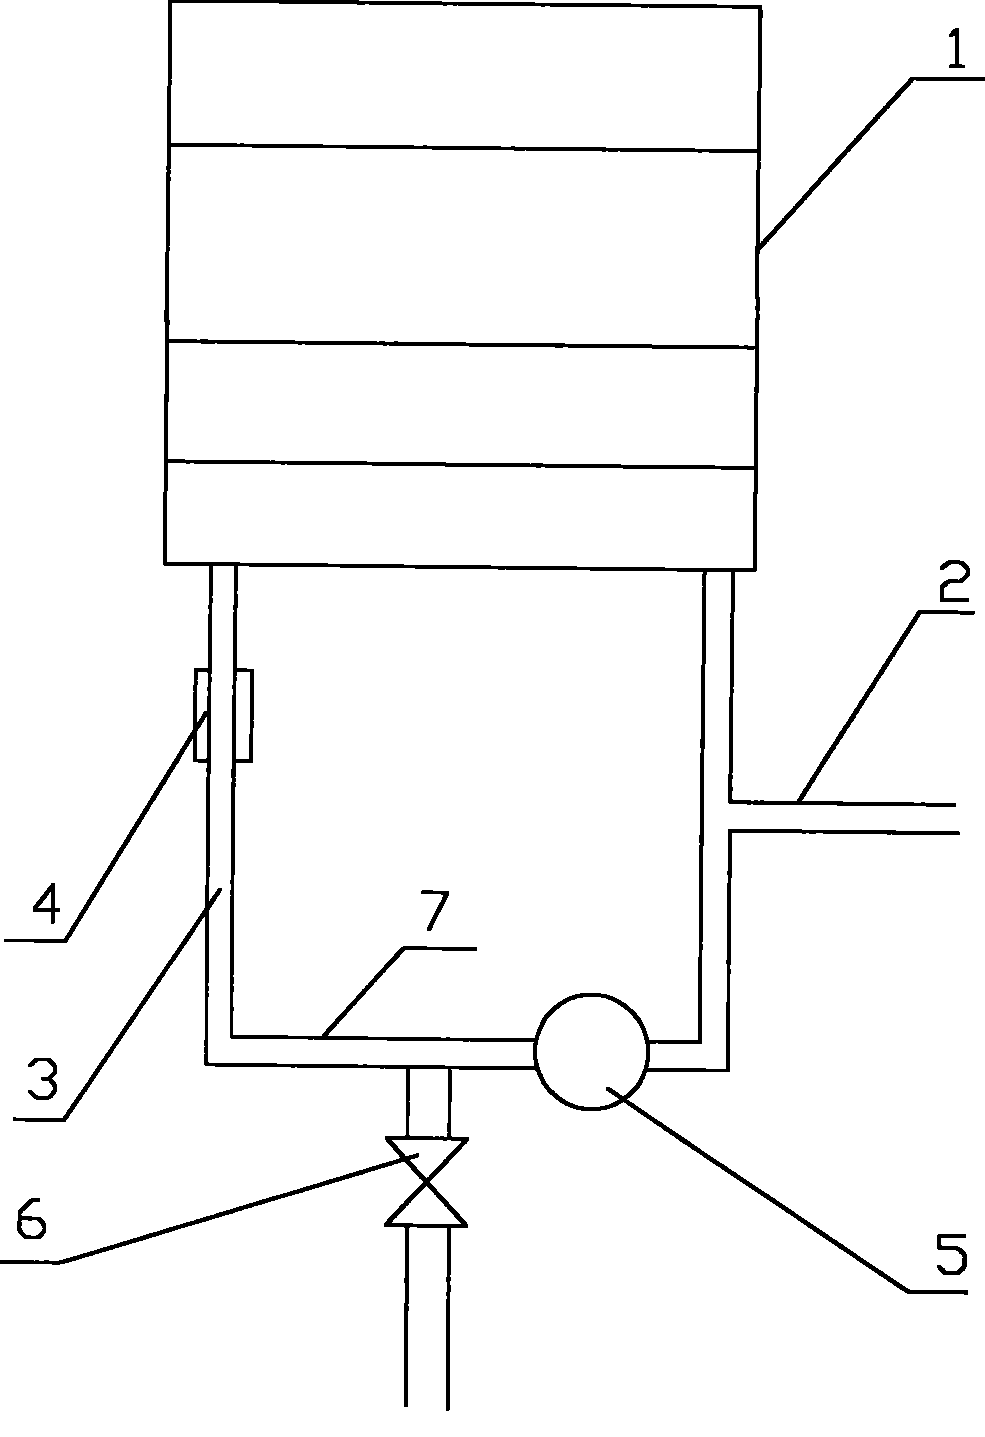 Water heater open-and-heating device